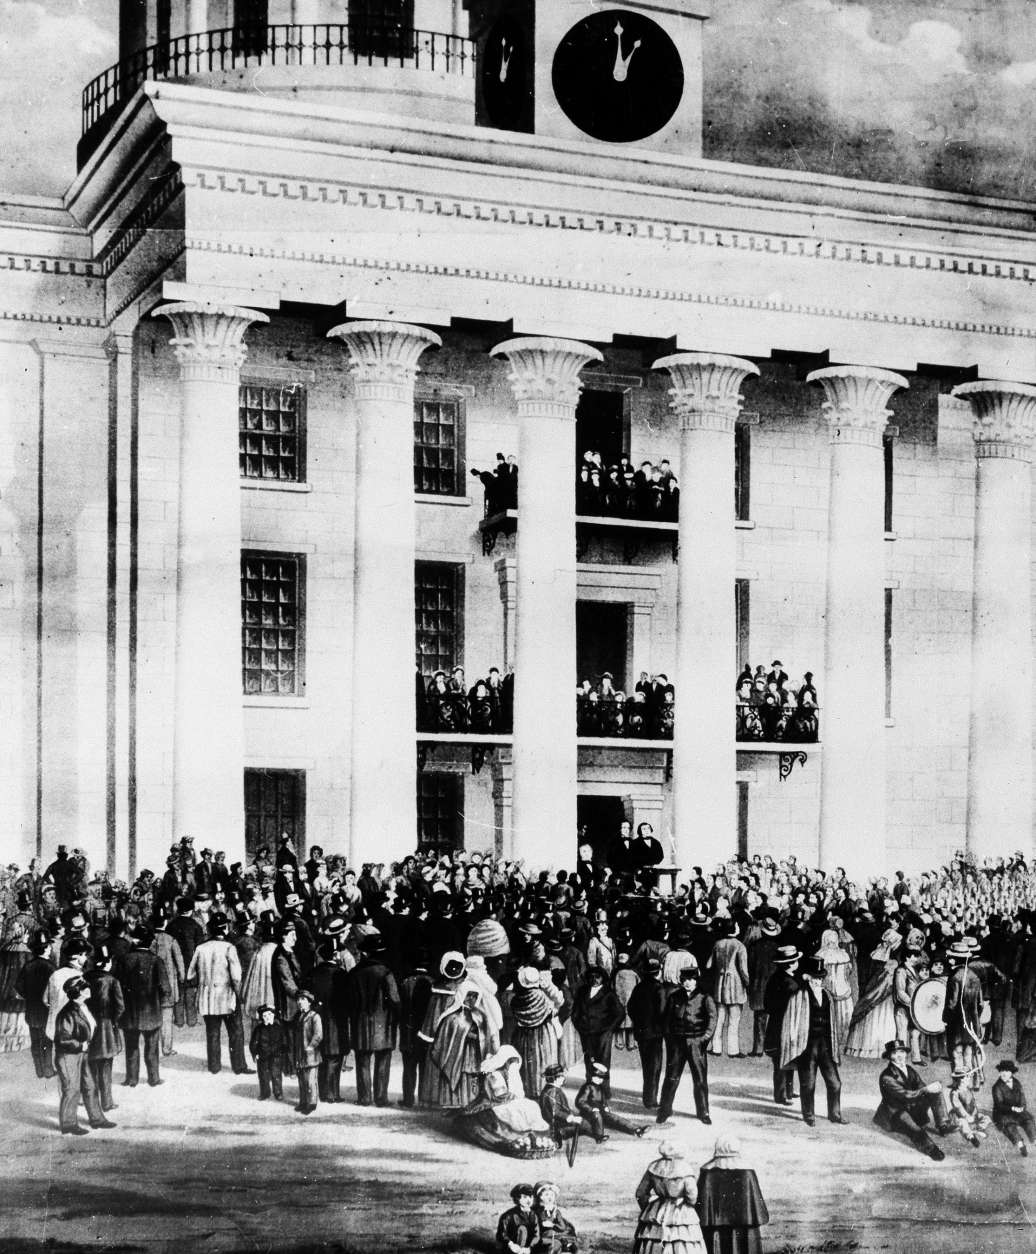 This was the scene during the inauguration of the President of the Confederate States of America, Jefferson Davis, Feb. 18, 1861, in Montgomery, Ala., painted by artist James Mamelon from a photograph taken on the spot and owned by Col. William C. Howell.  (AP Photo)